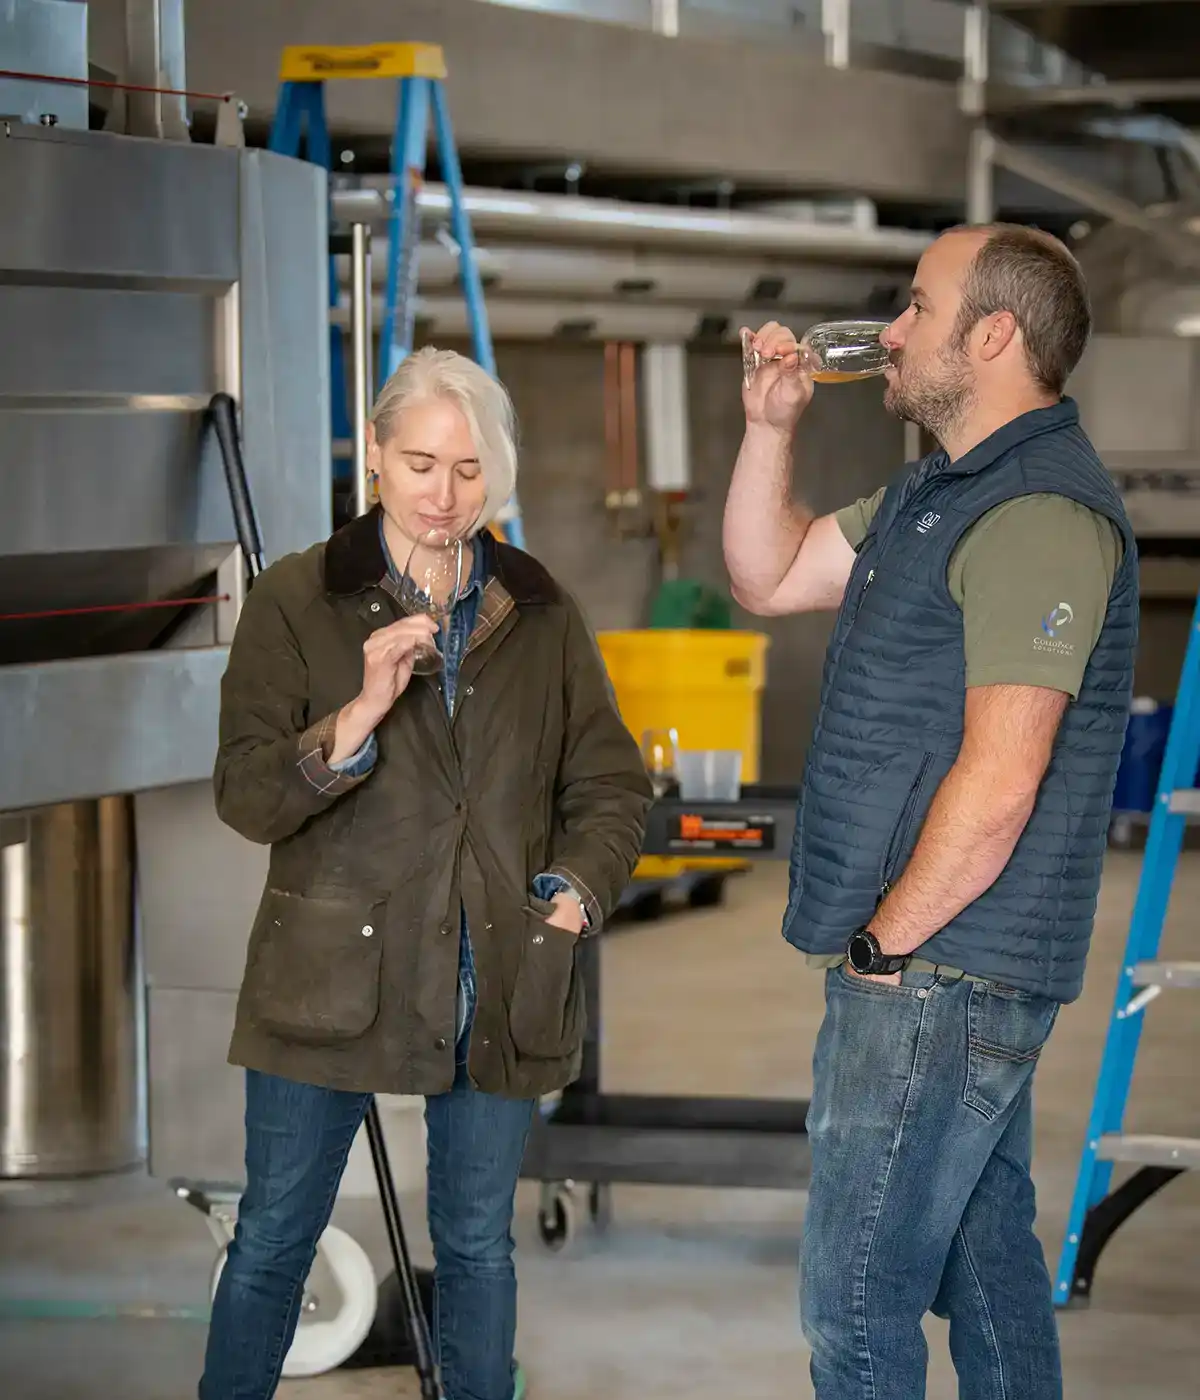 Two people in casual attire tasting Chardonnay wine in an industrial setting. One is holding a glass to their nose while the other takes a sip, savoring the flavors of Willamette Valley. They stand next to large stainless equipment and a yellow bin.